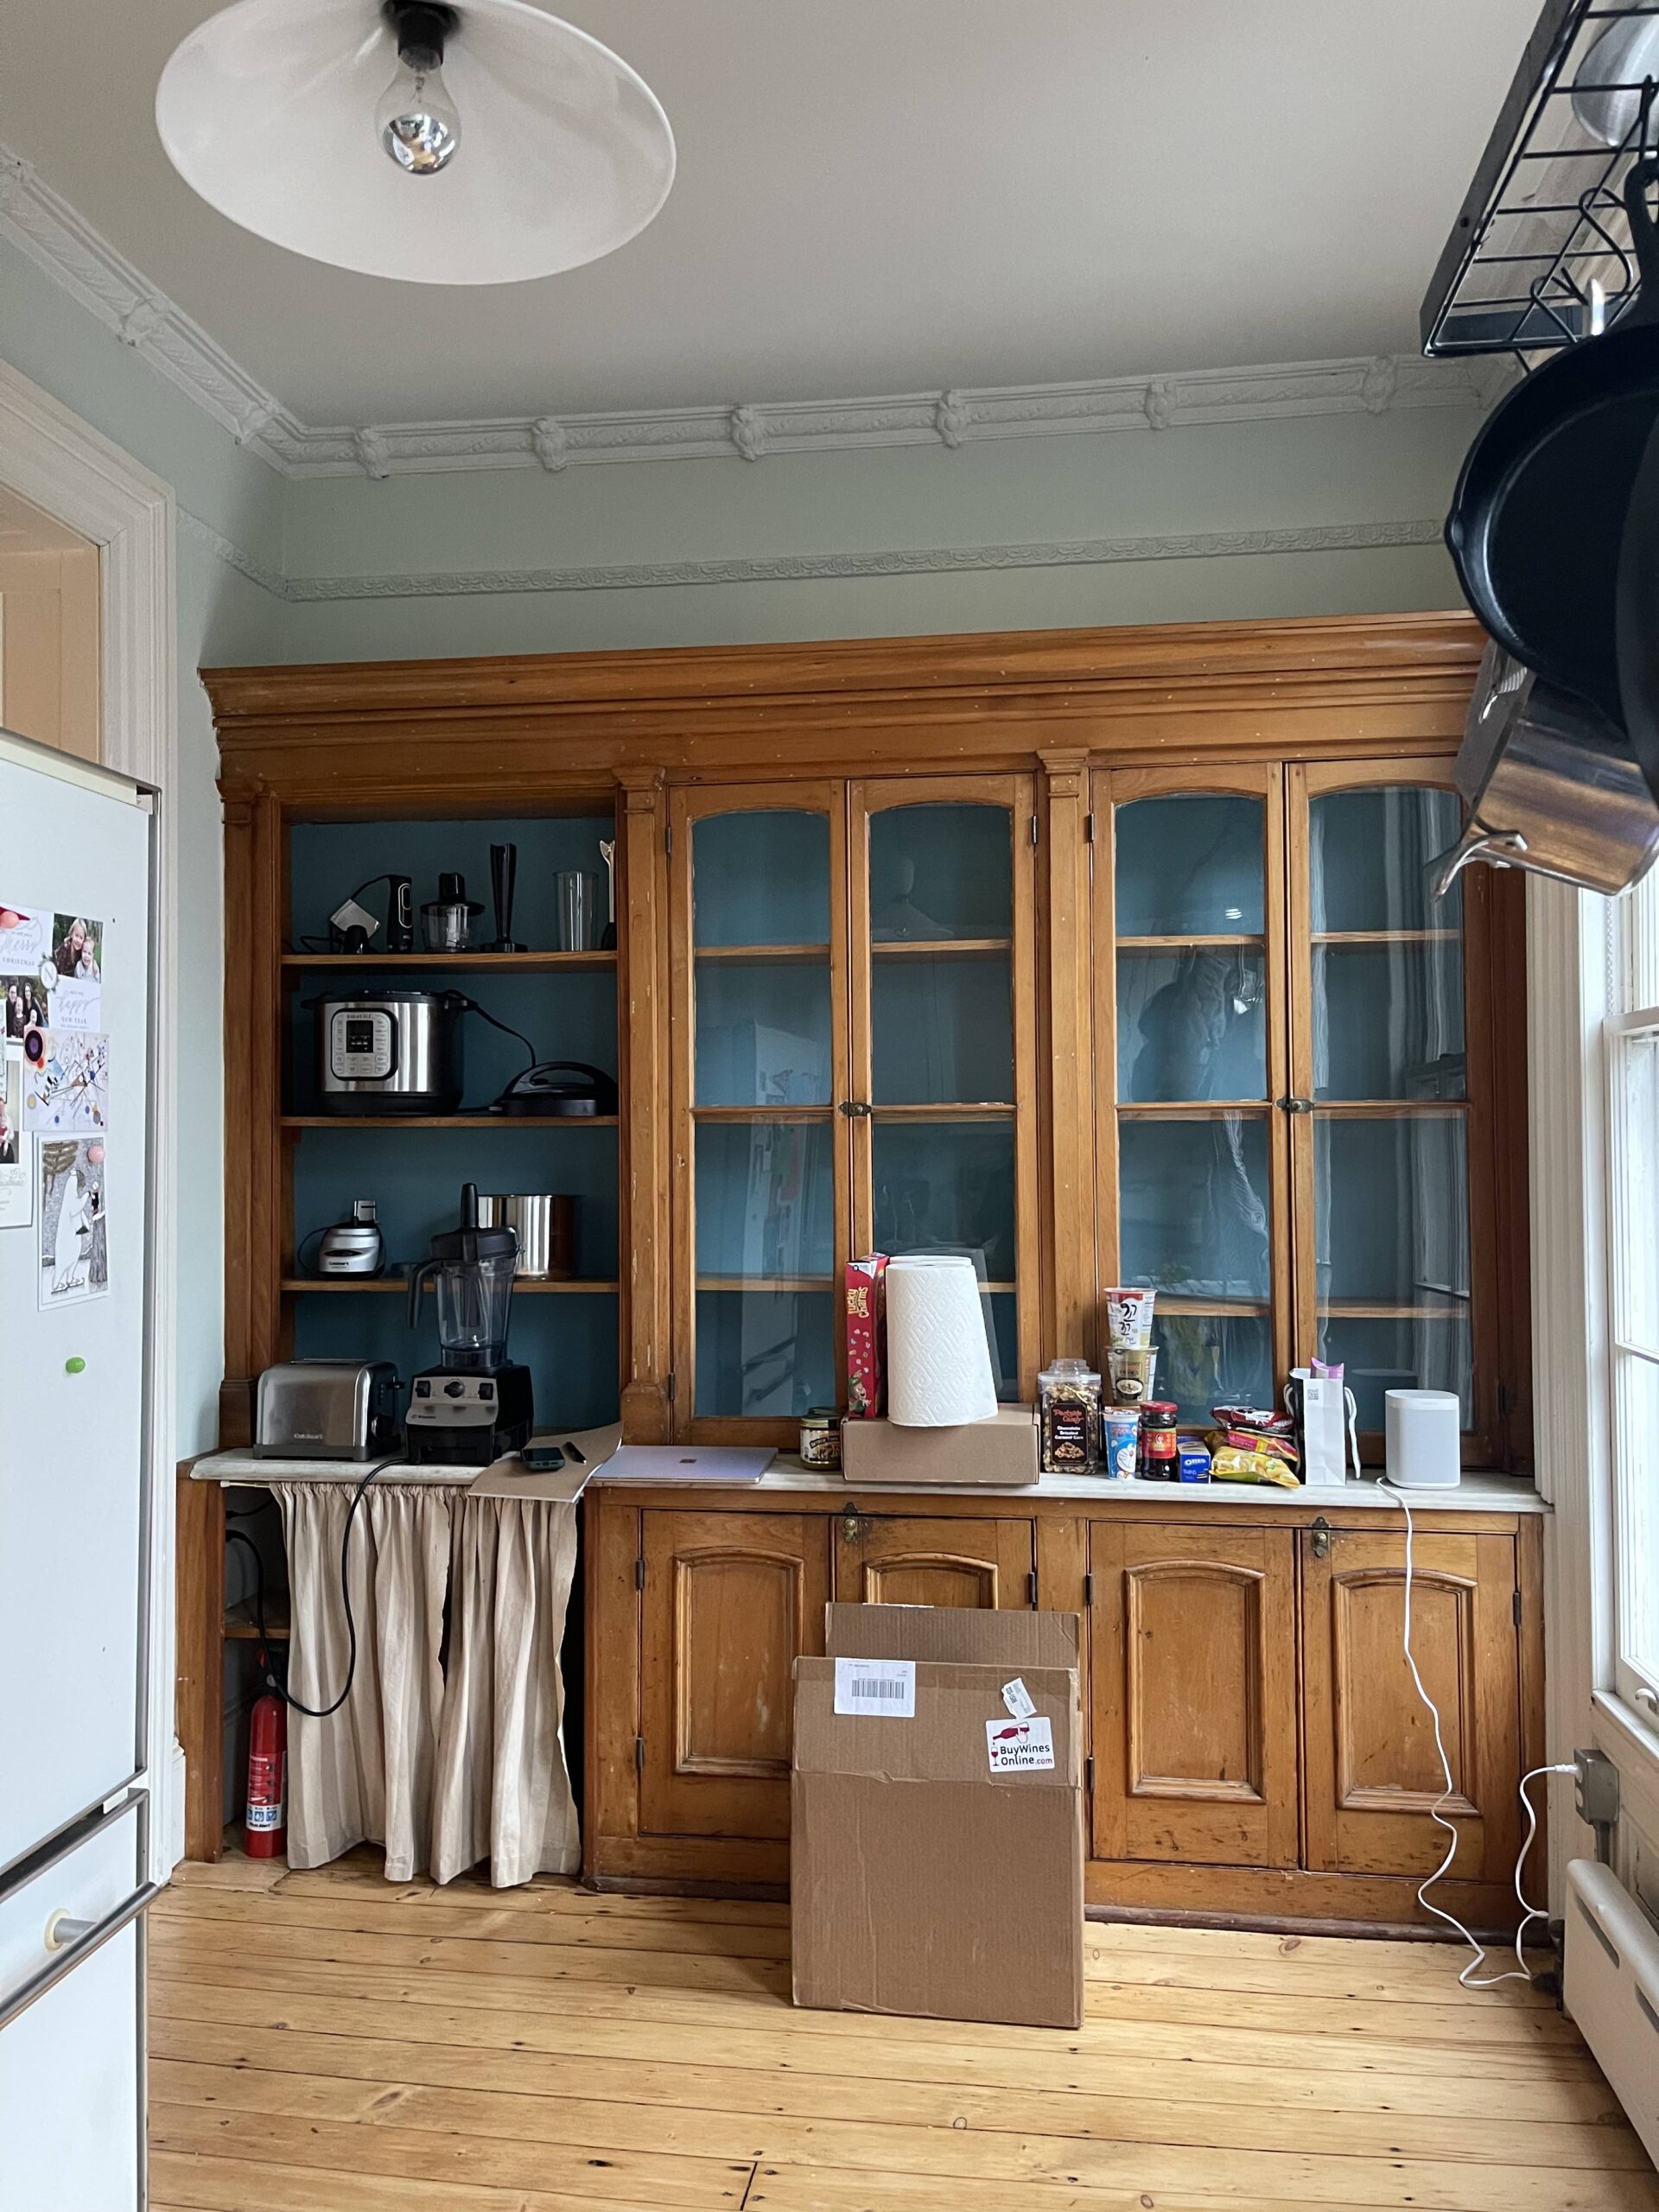 old wood kitchen cabinets